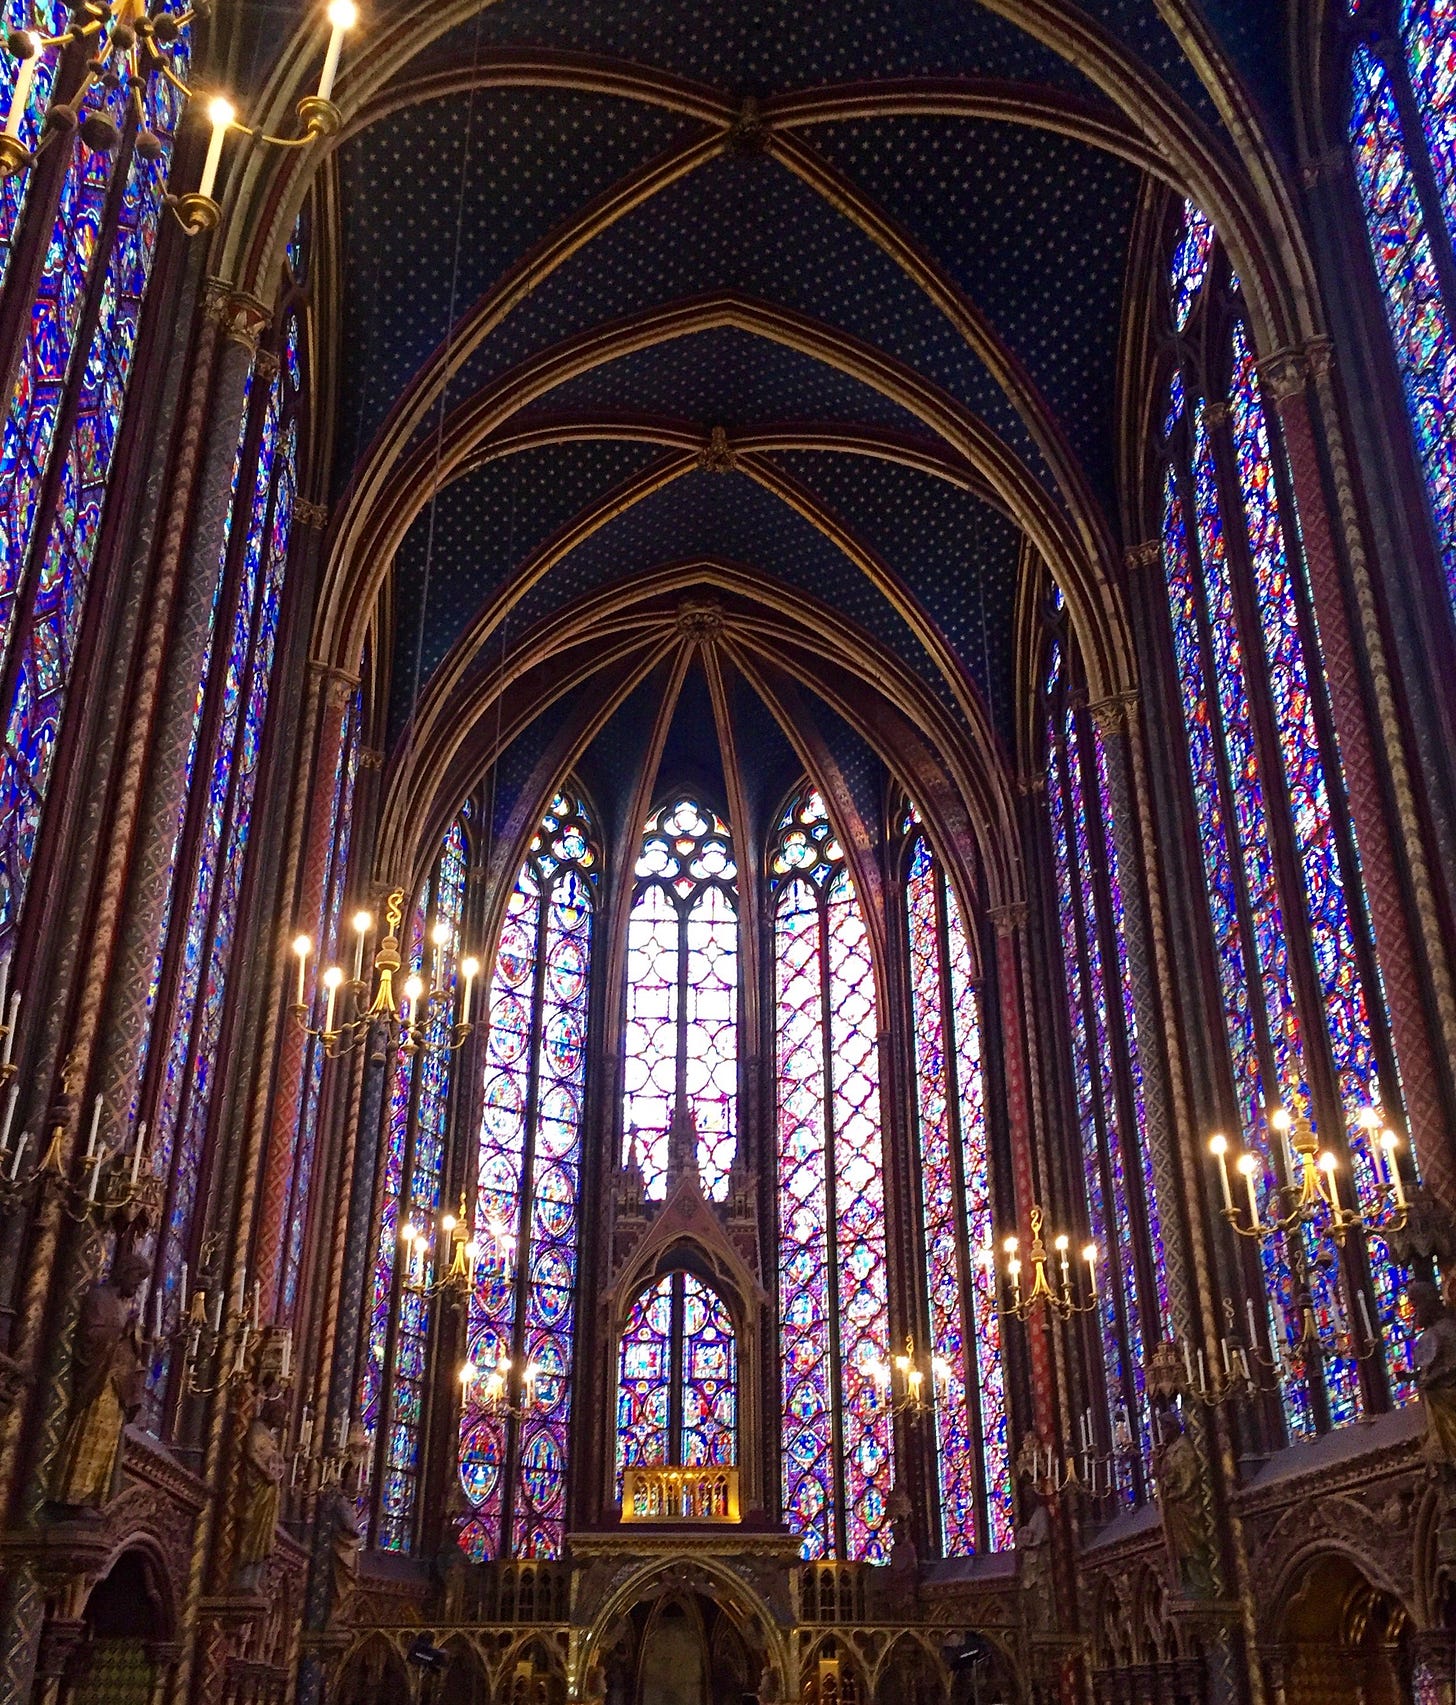 cathedral with walls of stained glass and gold arches. the ceiling is dark blue with gold stars, and the windows give off a purple glow